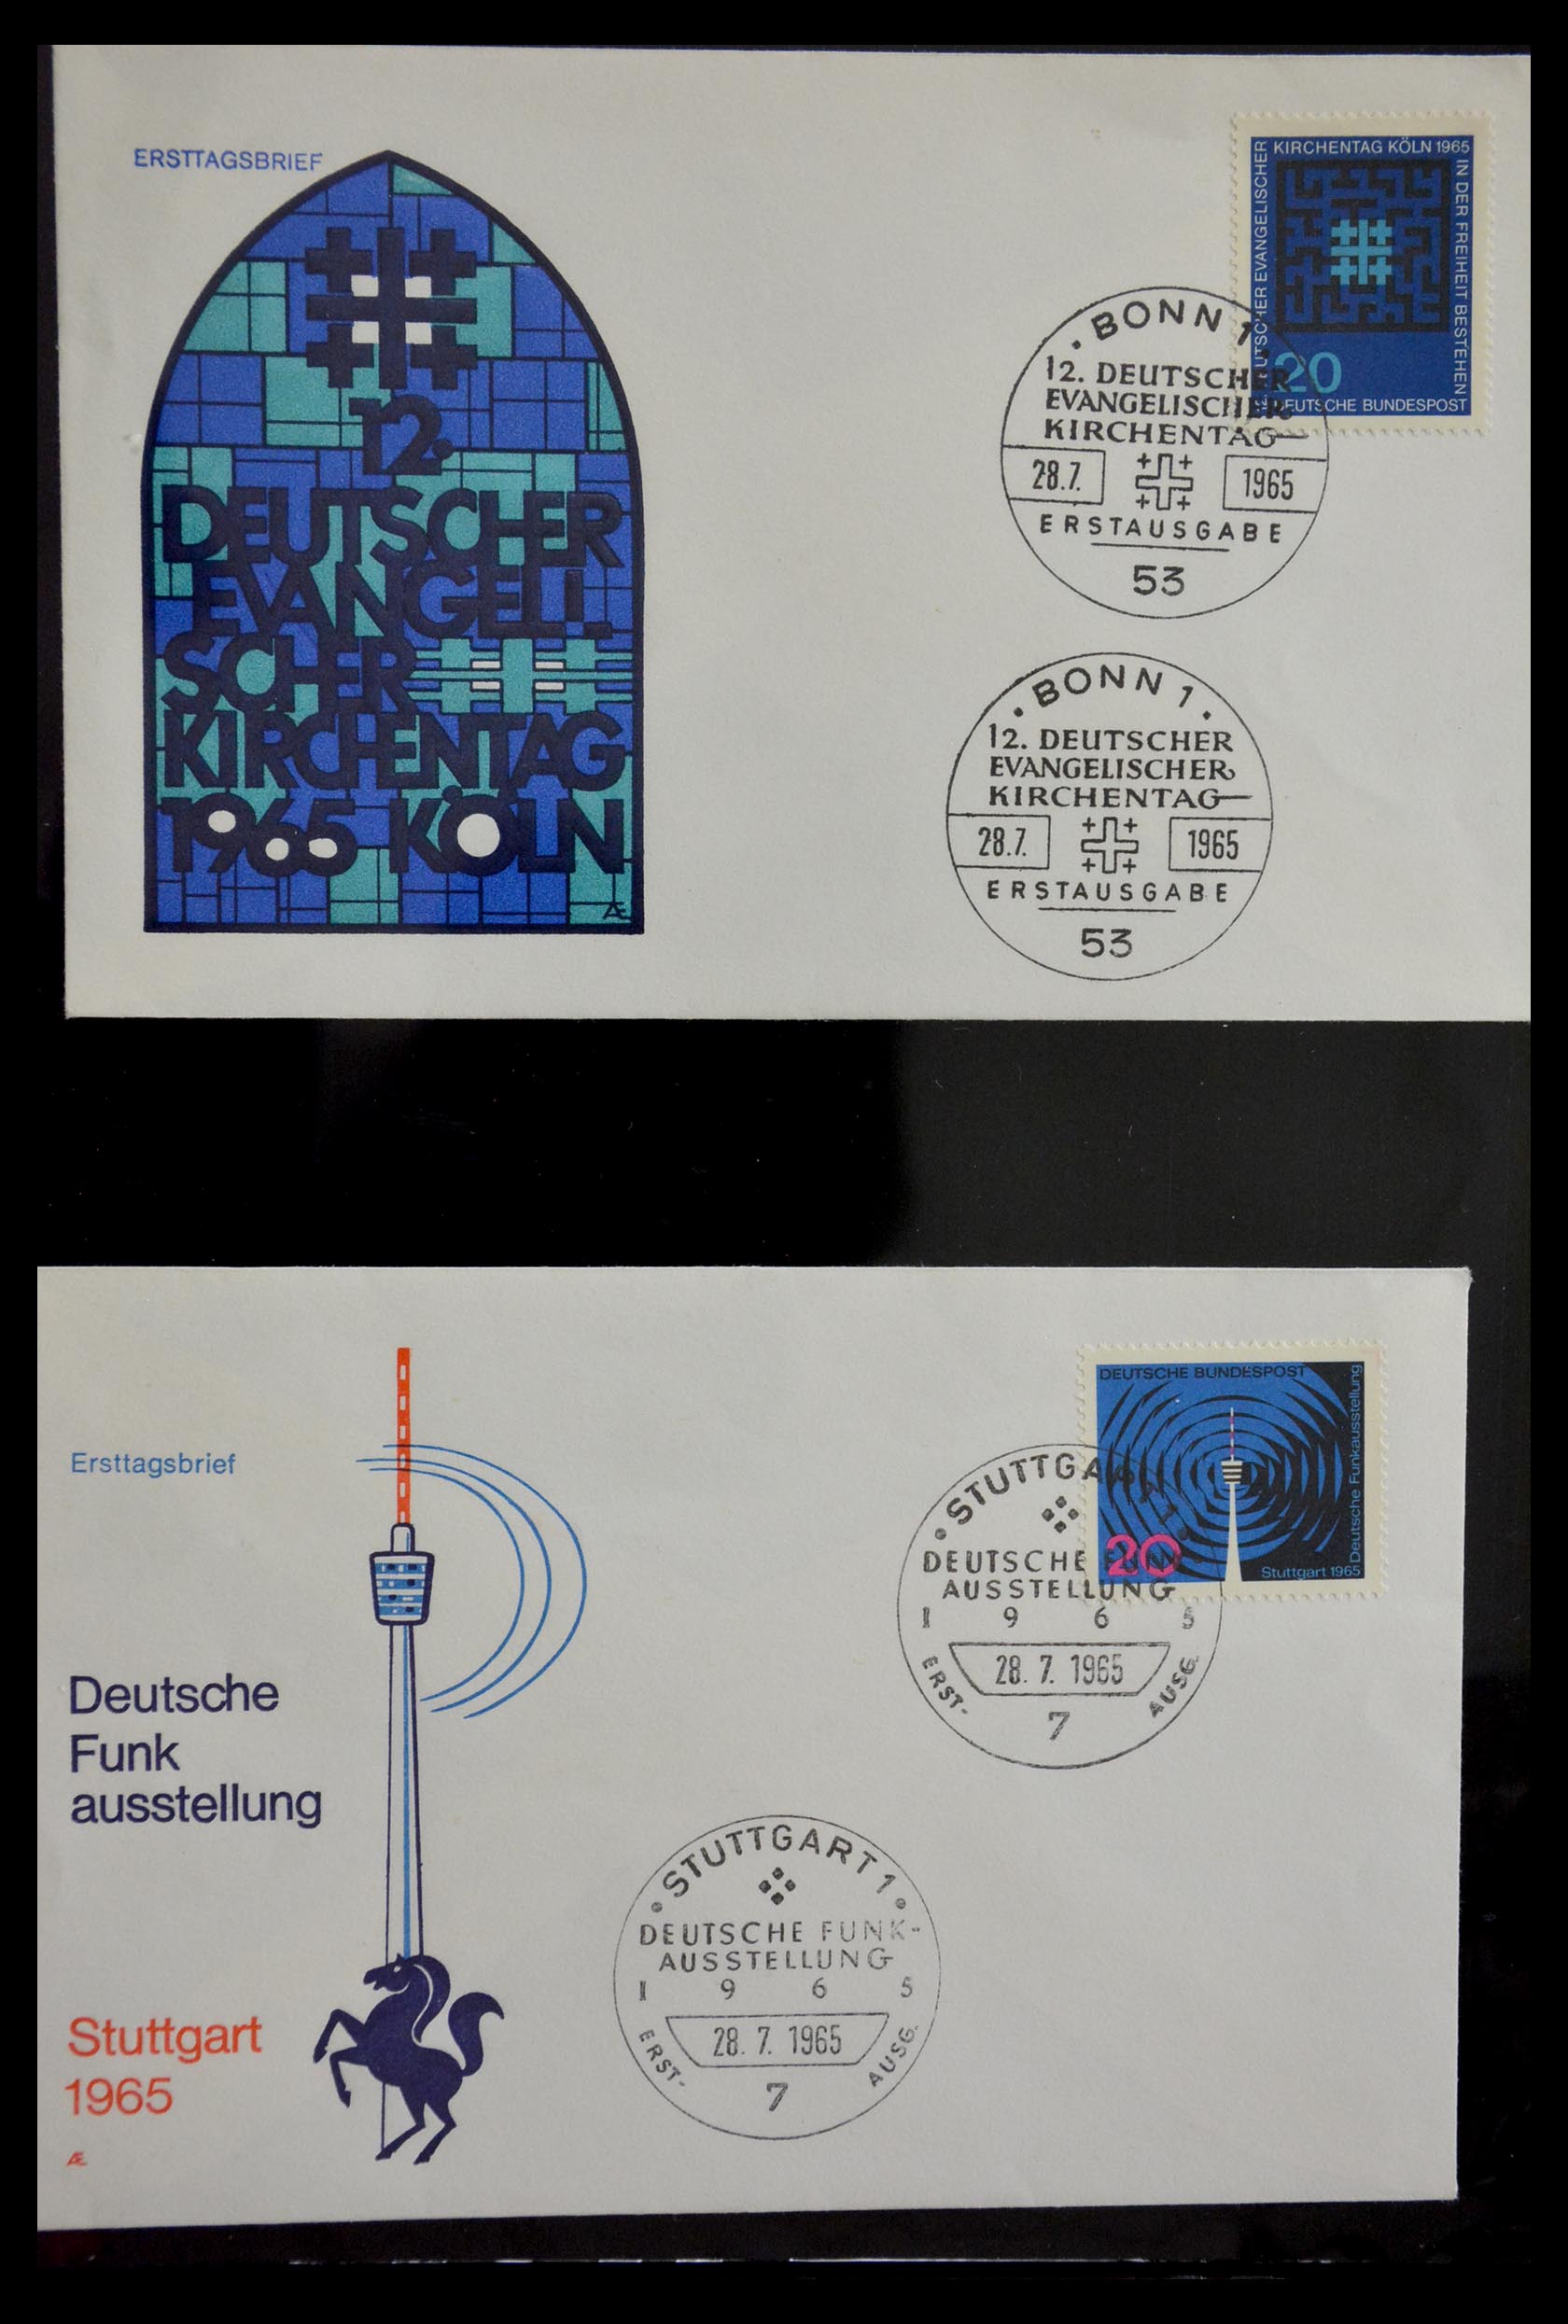 29382 042 - 29382 Germany covers and FDC's 1936-1965.